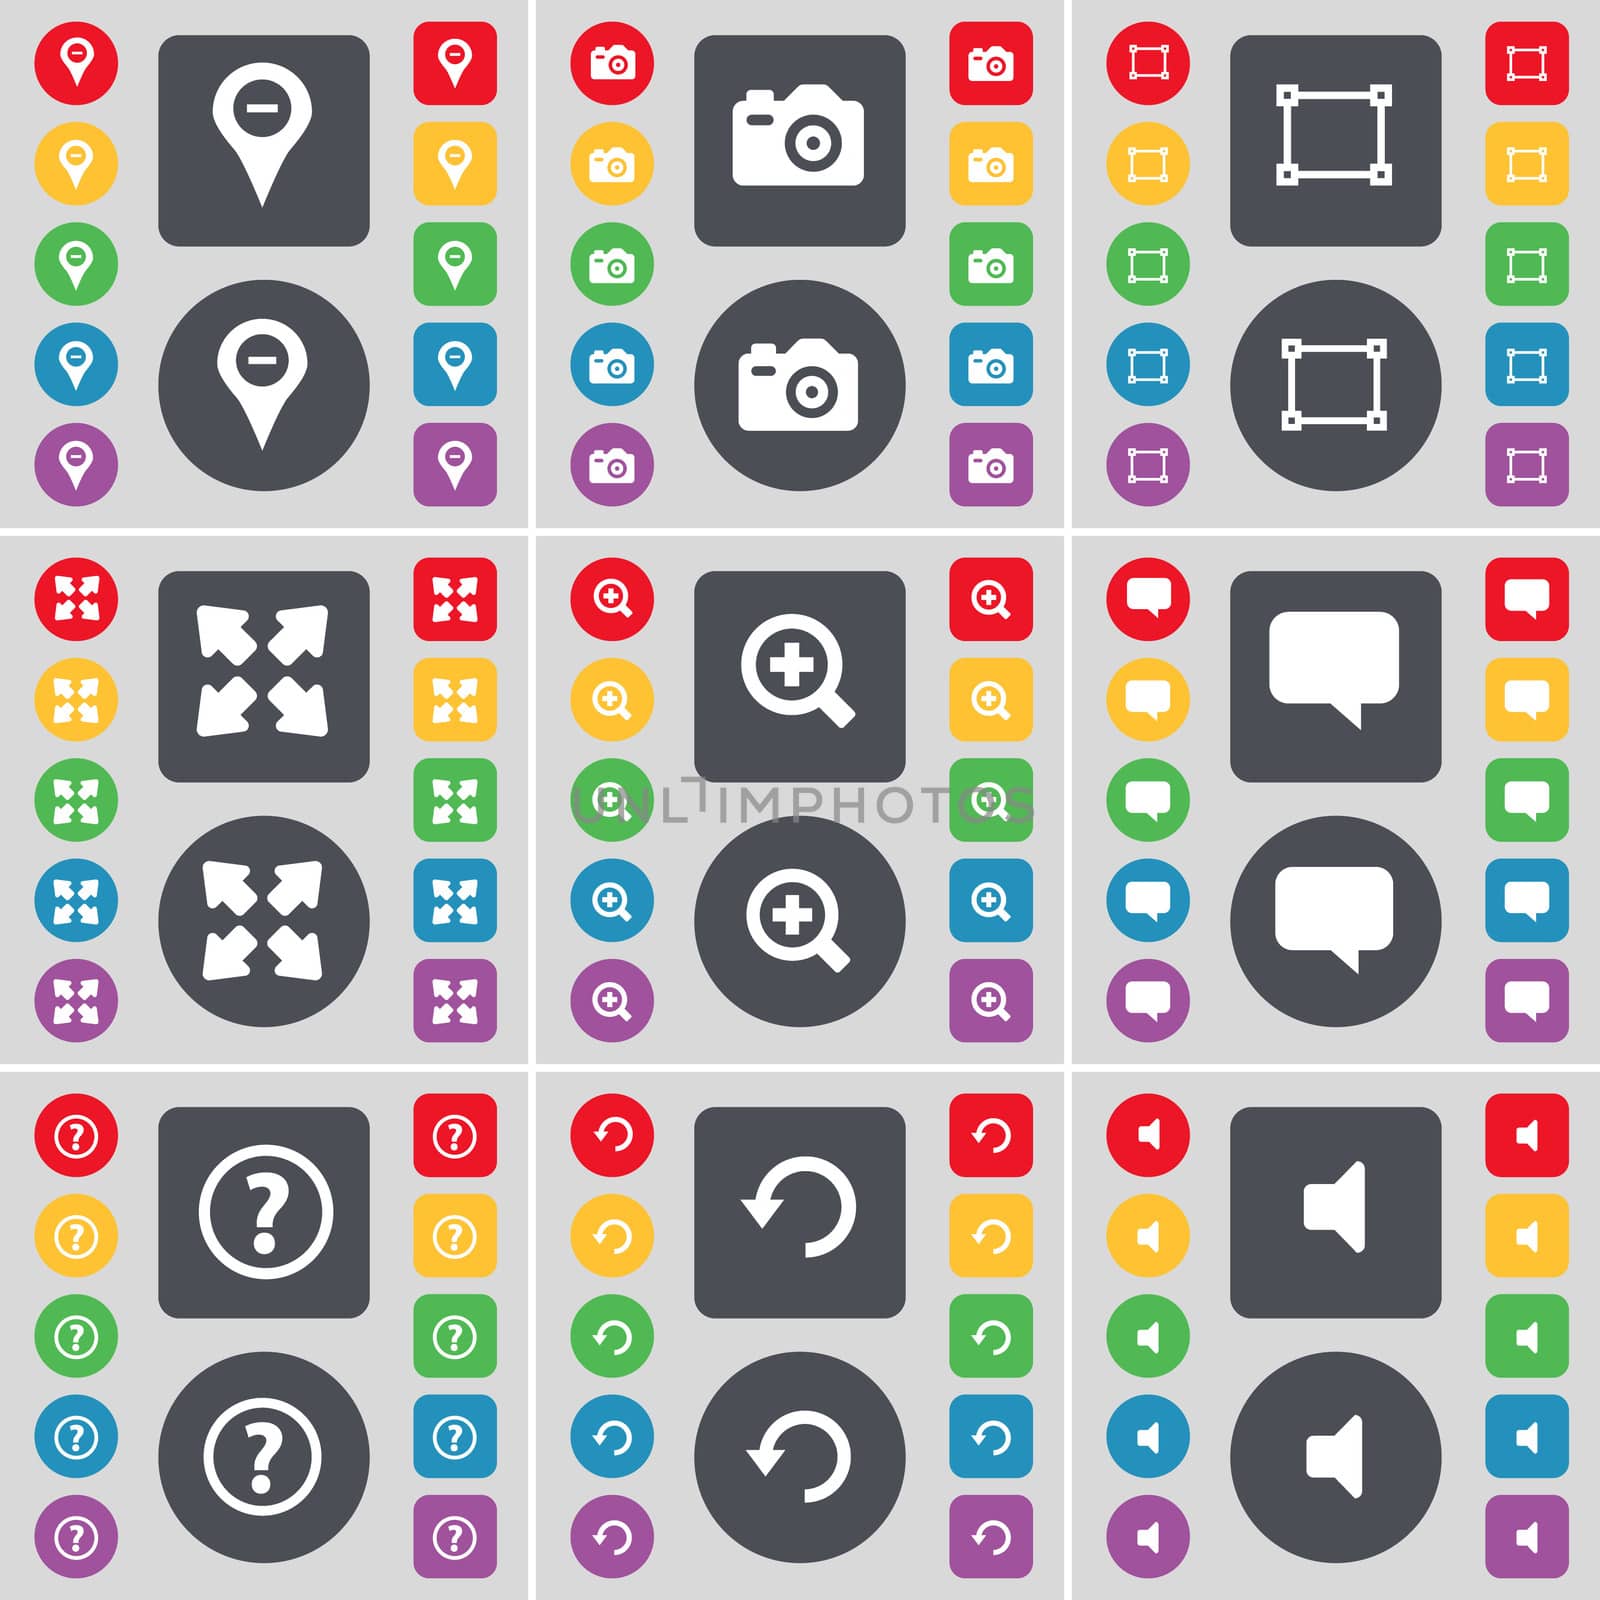 Checkpoint, Camera, Frame, Full screen, Magnifing glass, Chat bubble, Question mark, Reload, Sound icon symbol. A large set of flat, colored buttons for your design. illustration